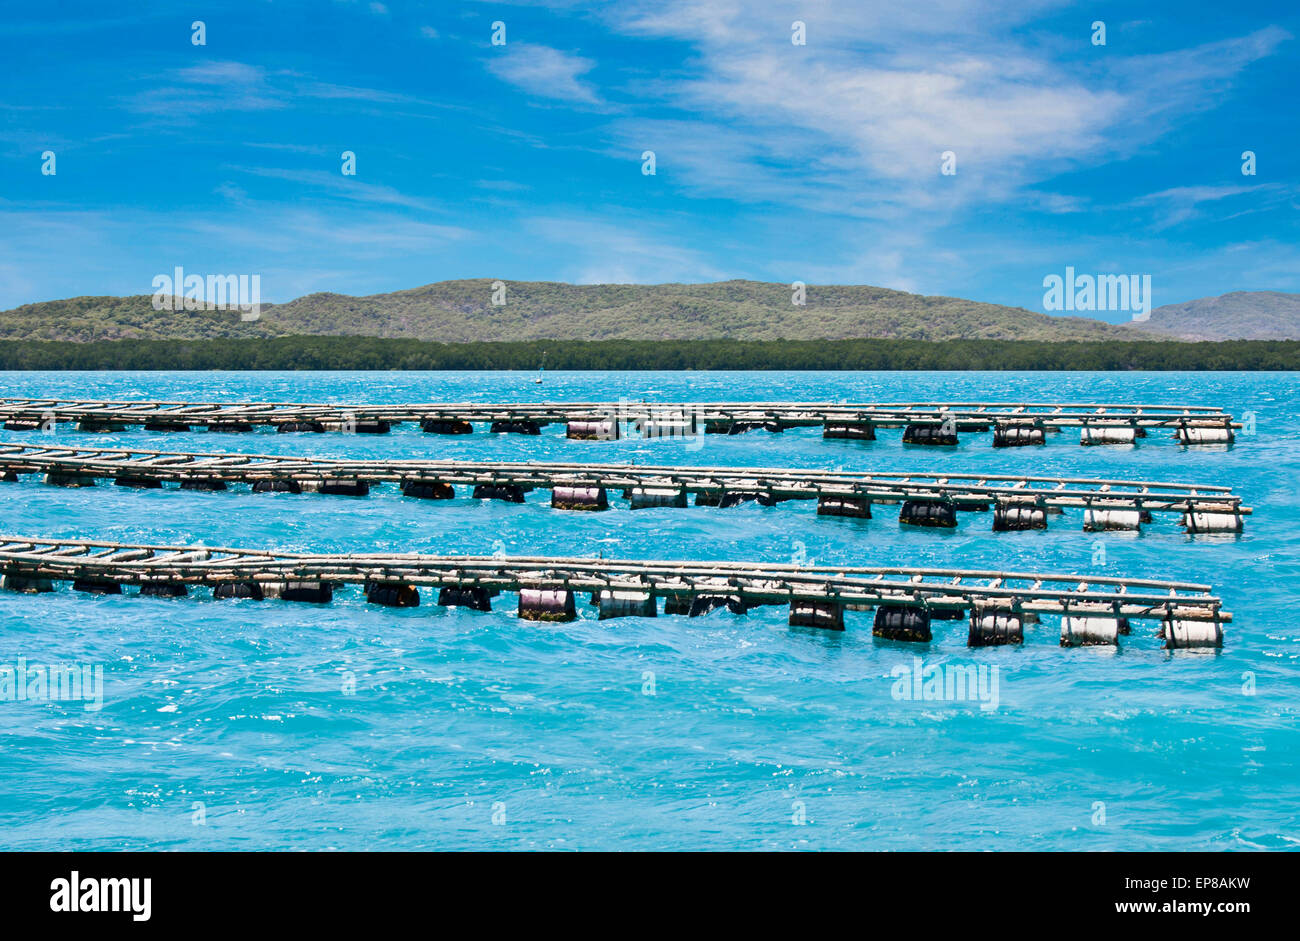 oyster farming on Friday Island Torres Strait Stock Photo